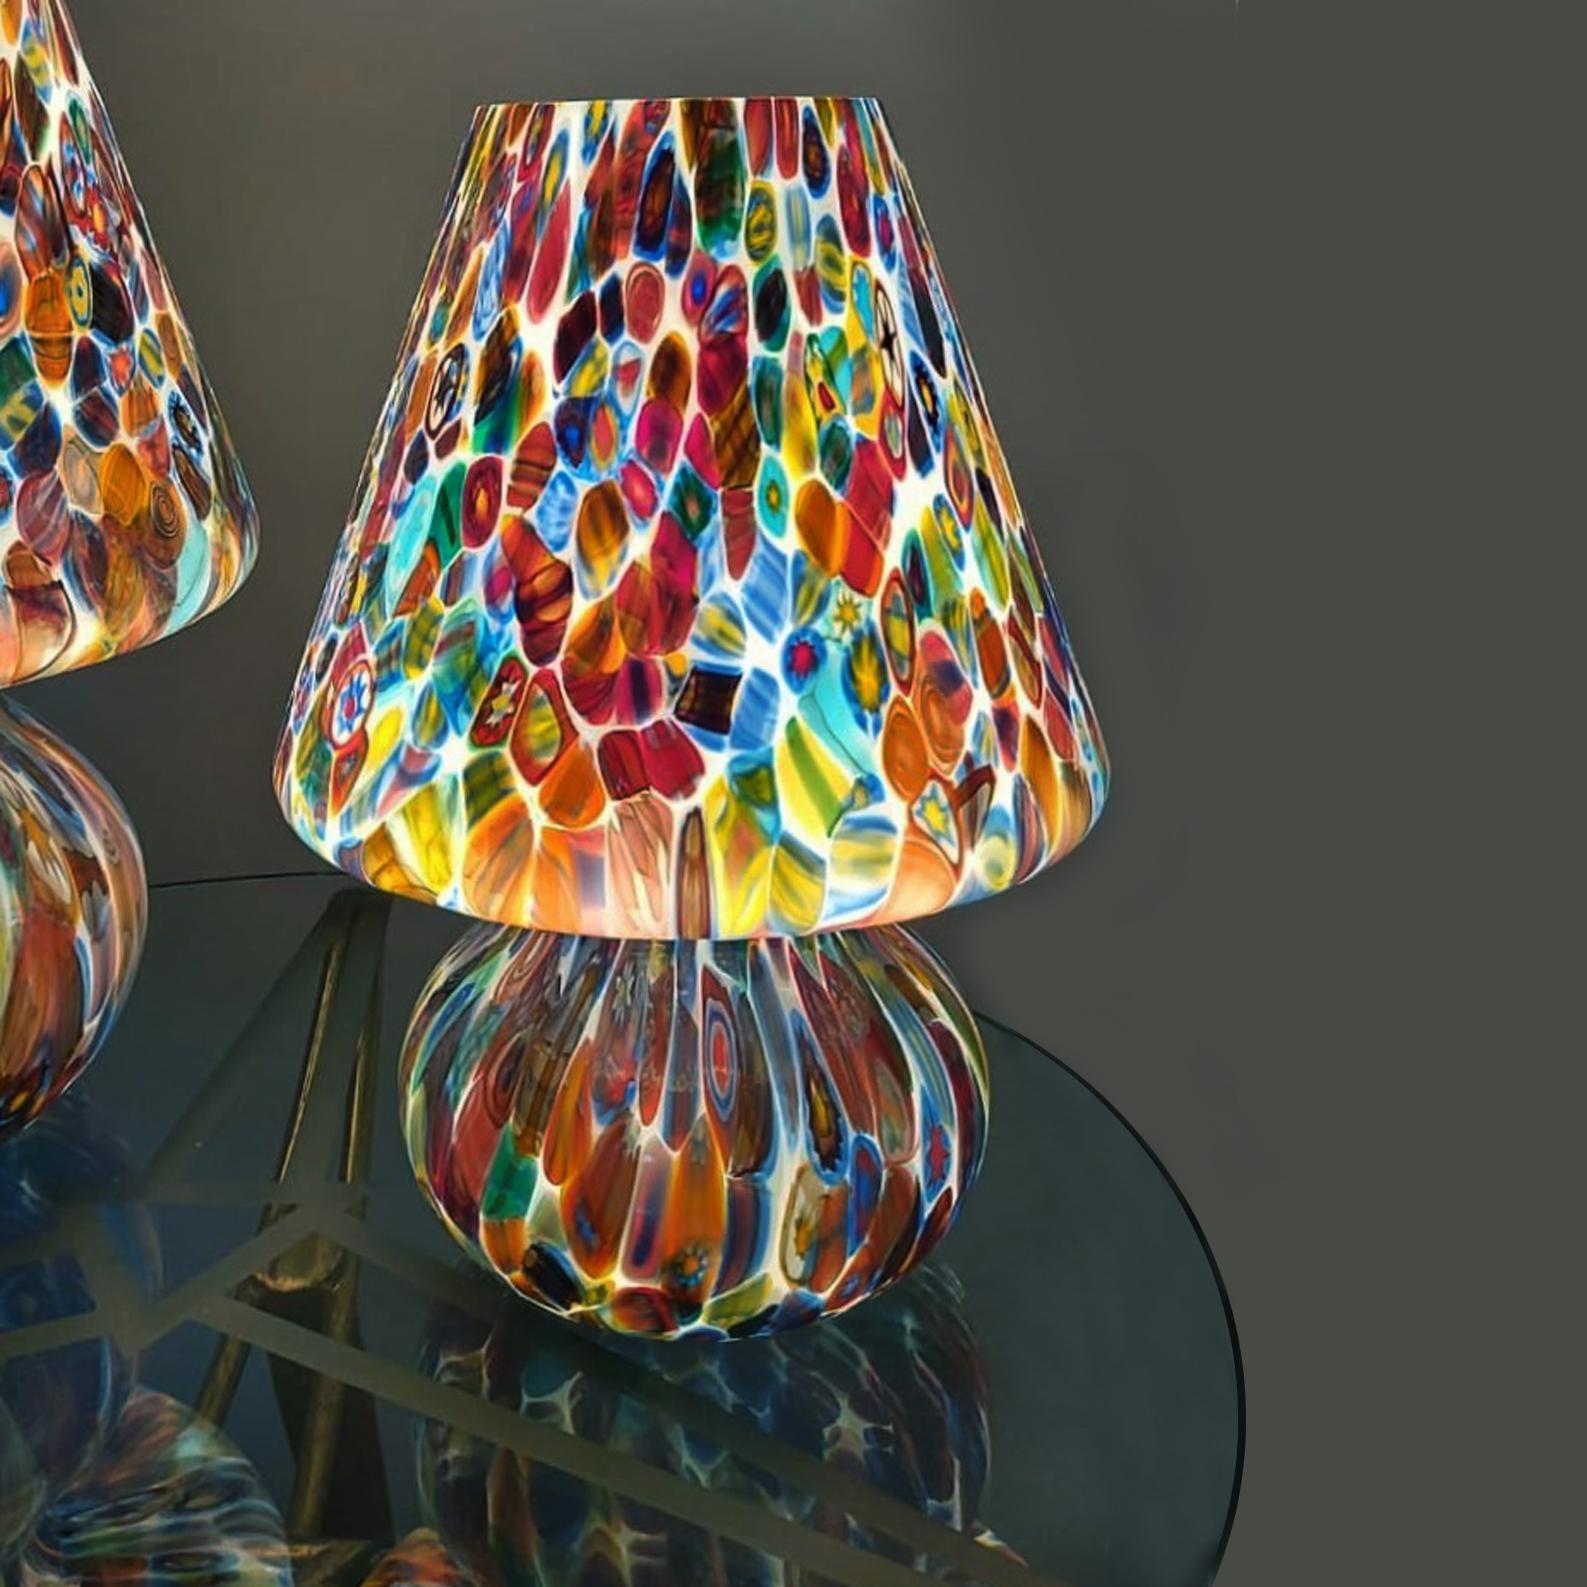 Pair of Big Hancrafted Murano Table Lamps Murrine Millefiori Decor, Italy 2000's For Sale 9